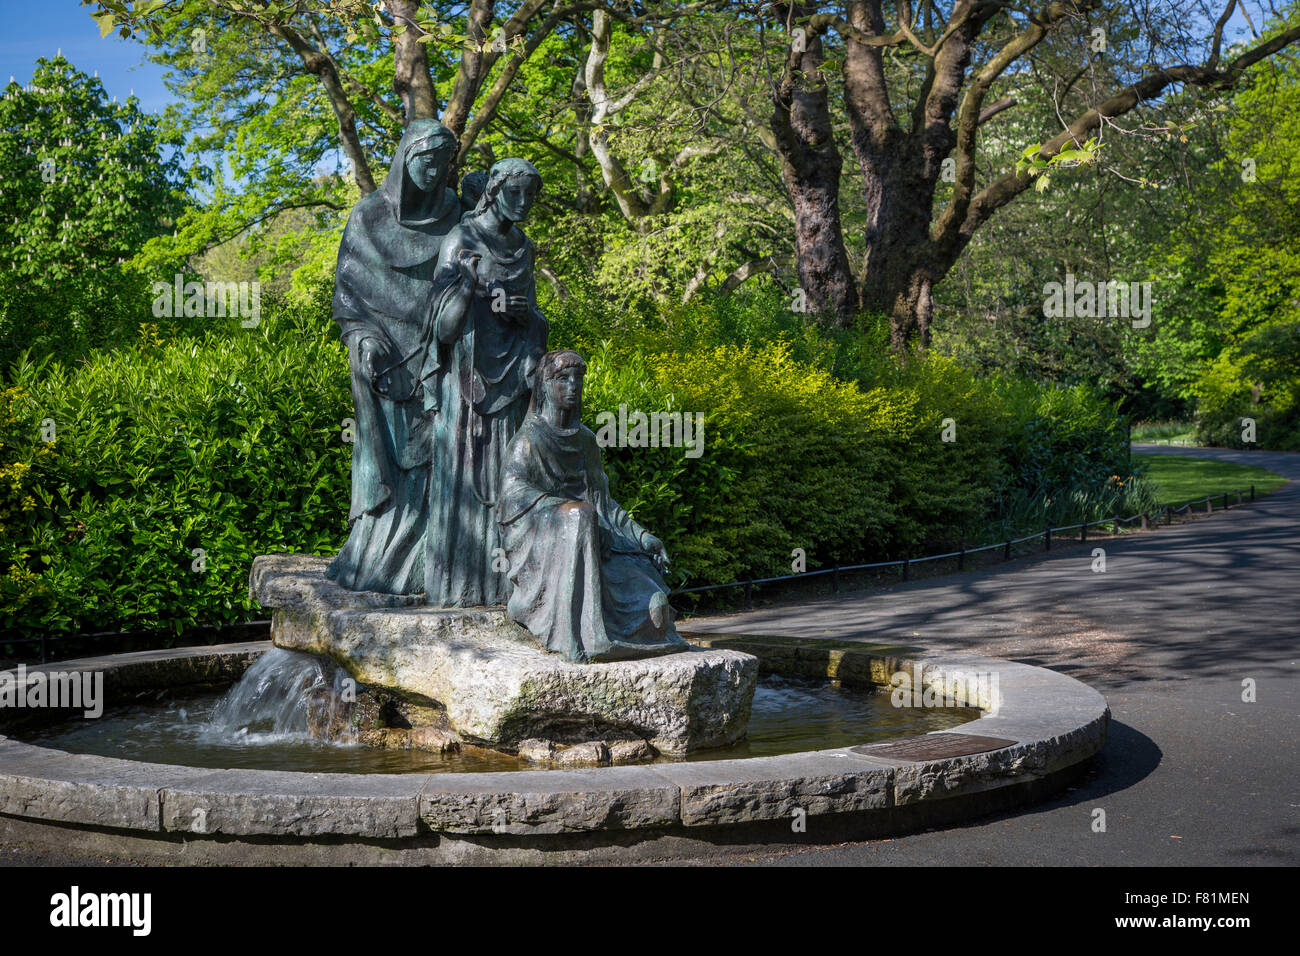 Statue of thanks from Germany to Ireland, St Stephens Green, Dublin, Ireland Stock Photo